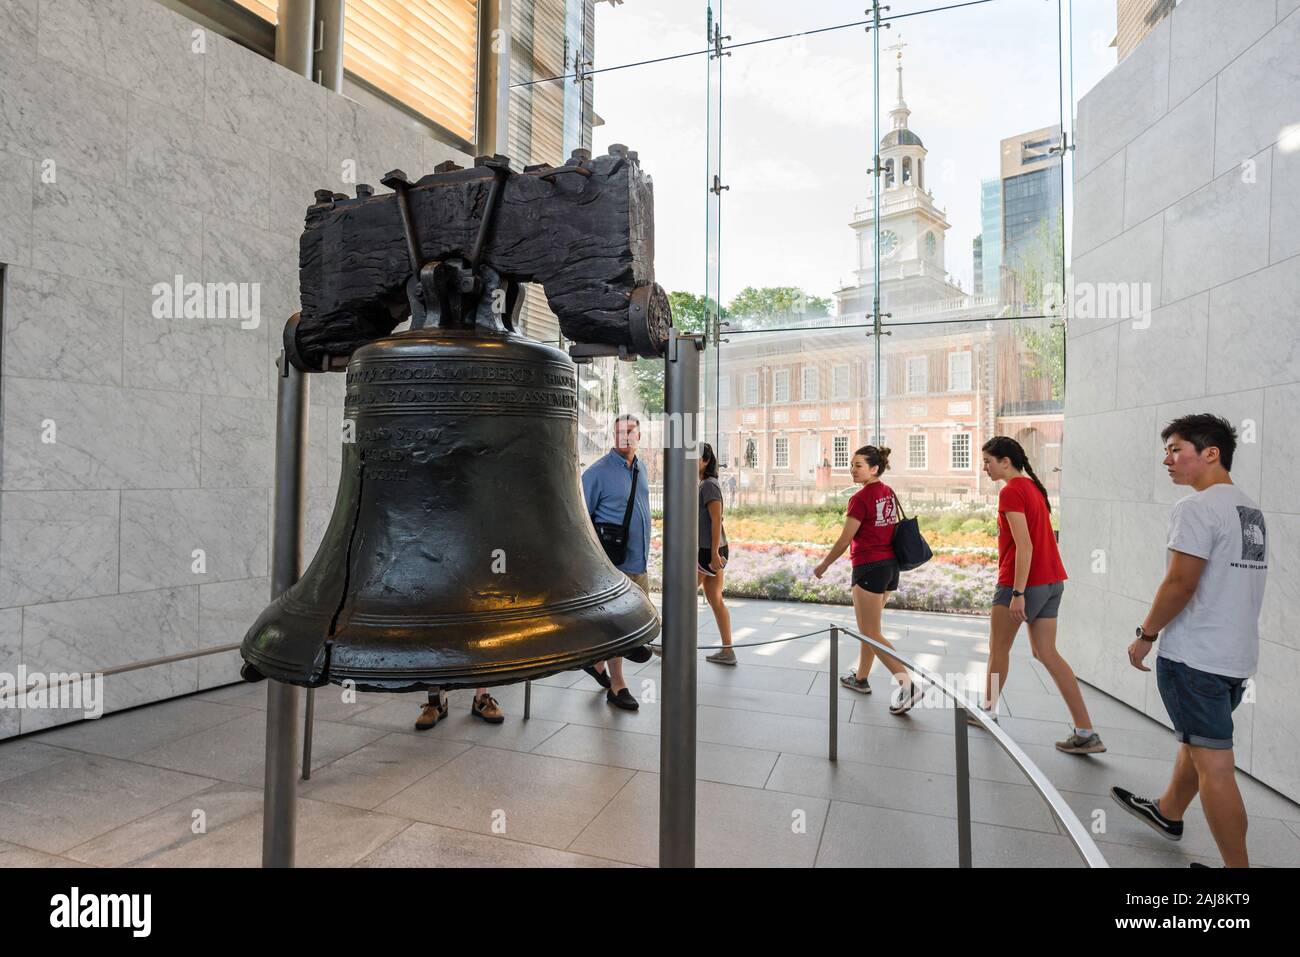 Liberty Bell, view of visitors to the Liberty Bell Center in Philadelphia walking around the Liberty Bell with its famous crack, Pennsylvania, USA. Stock Photo